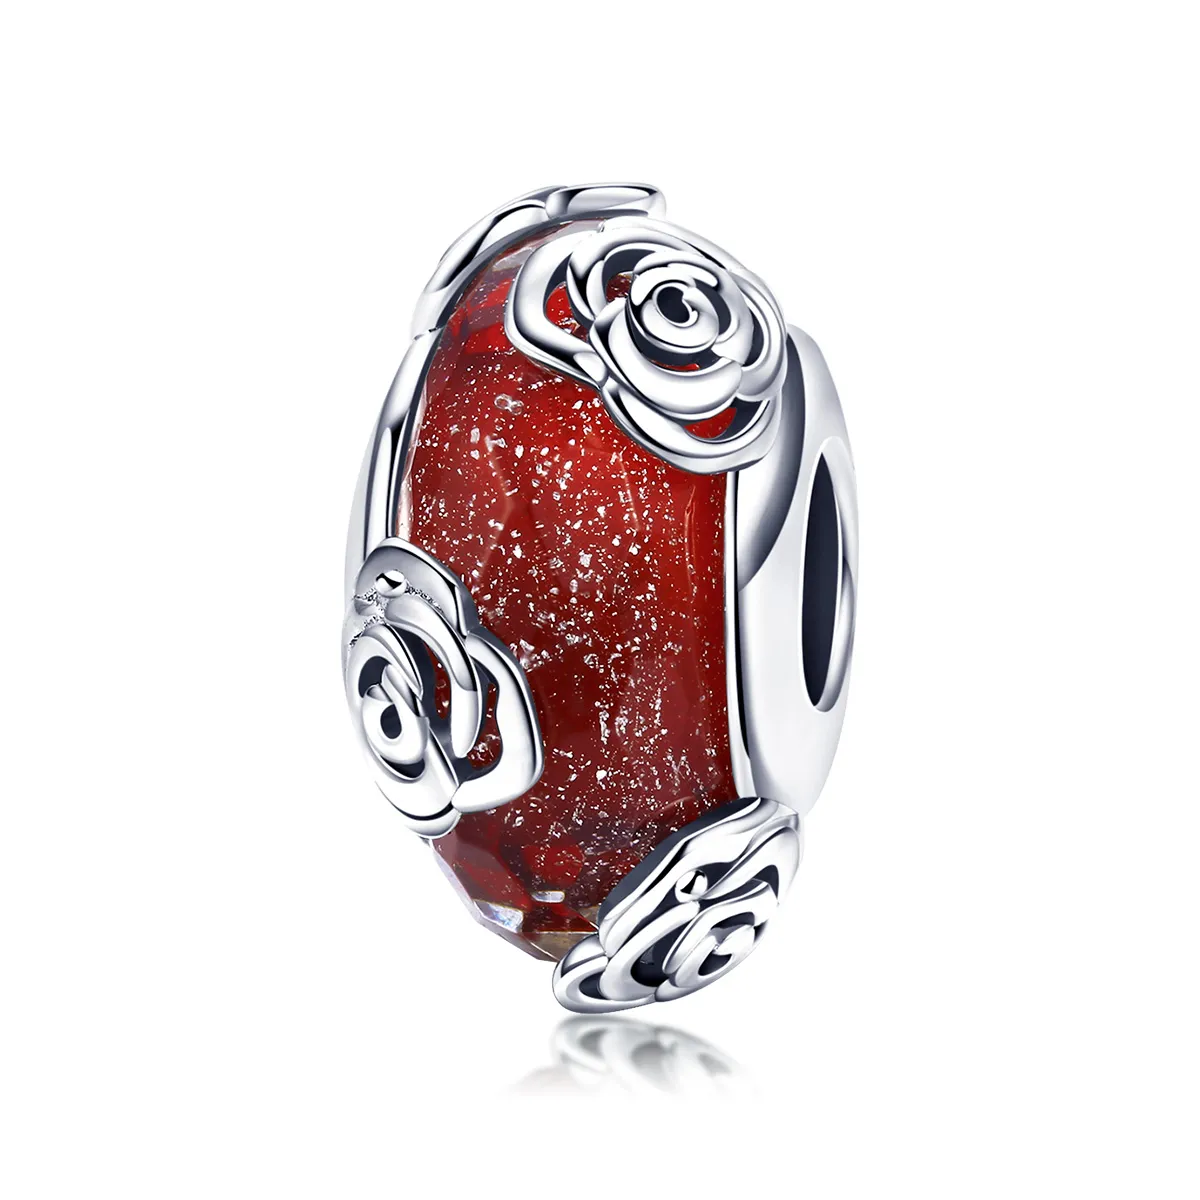 Pandora Style Silver Fragrant Rose Glass Murano Charm - SCC1030